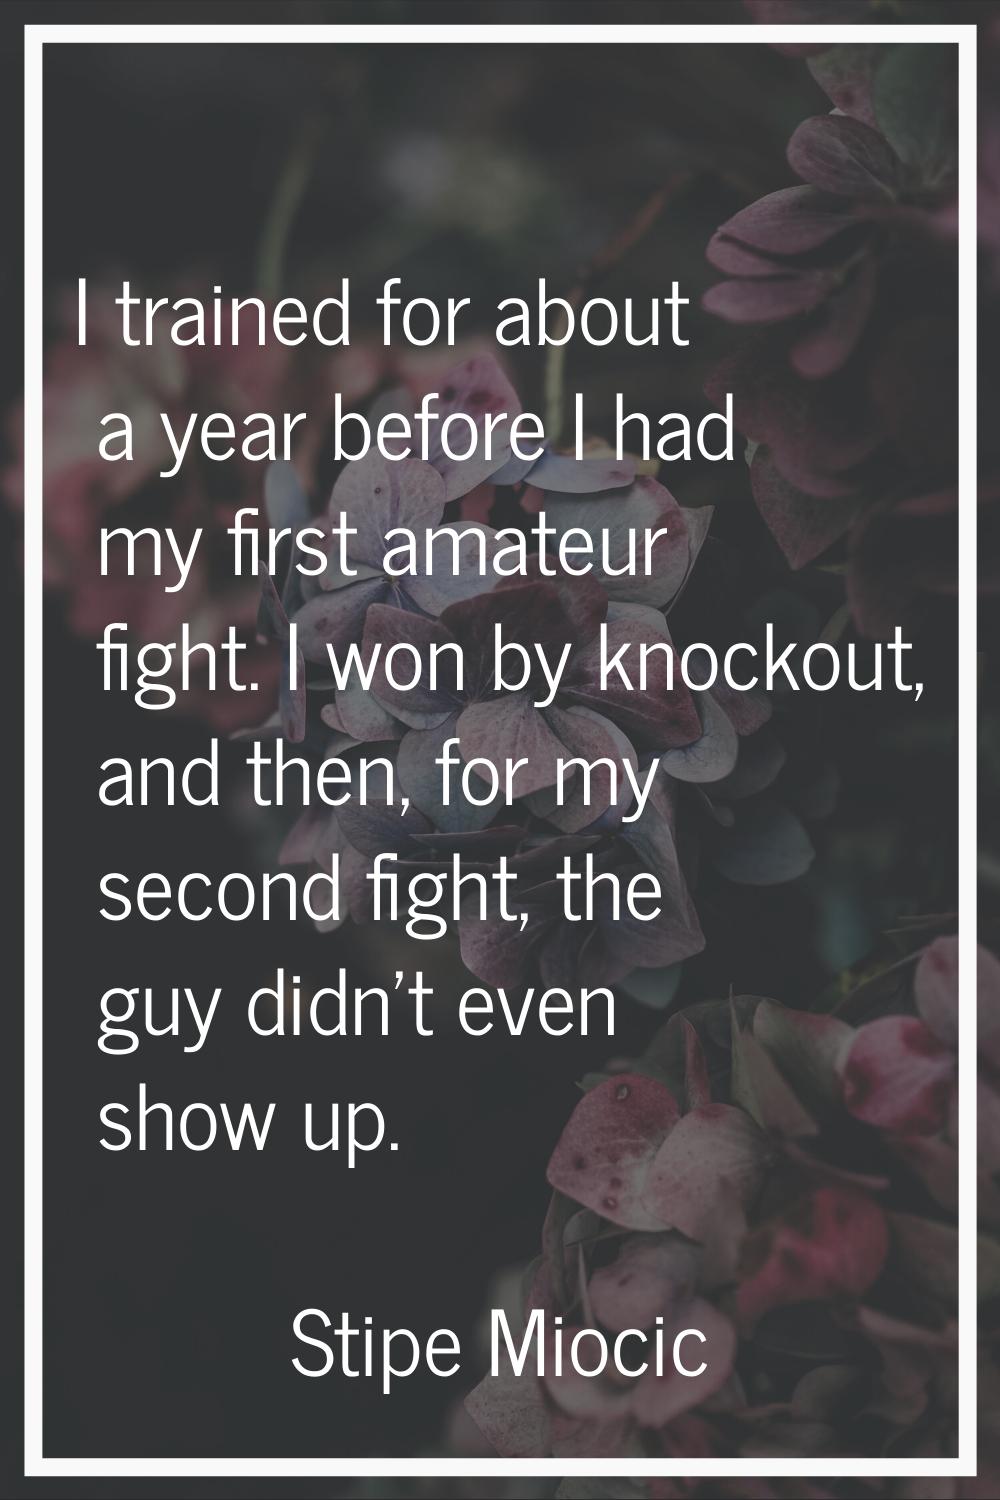 I trained for about a year before I had my first amateur fight. I won by knockout, and then, for my